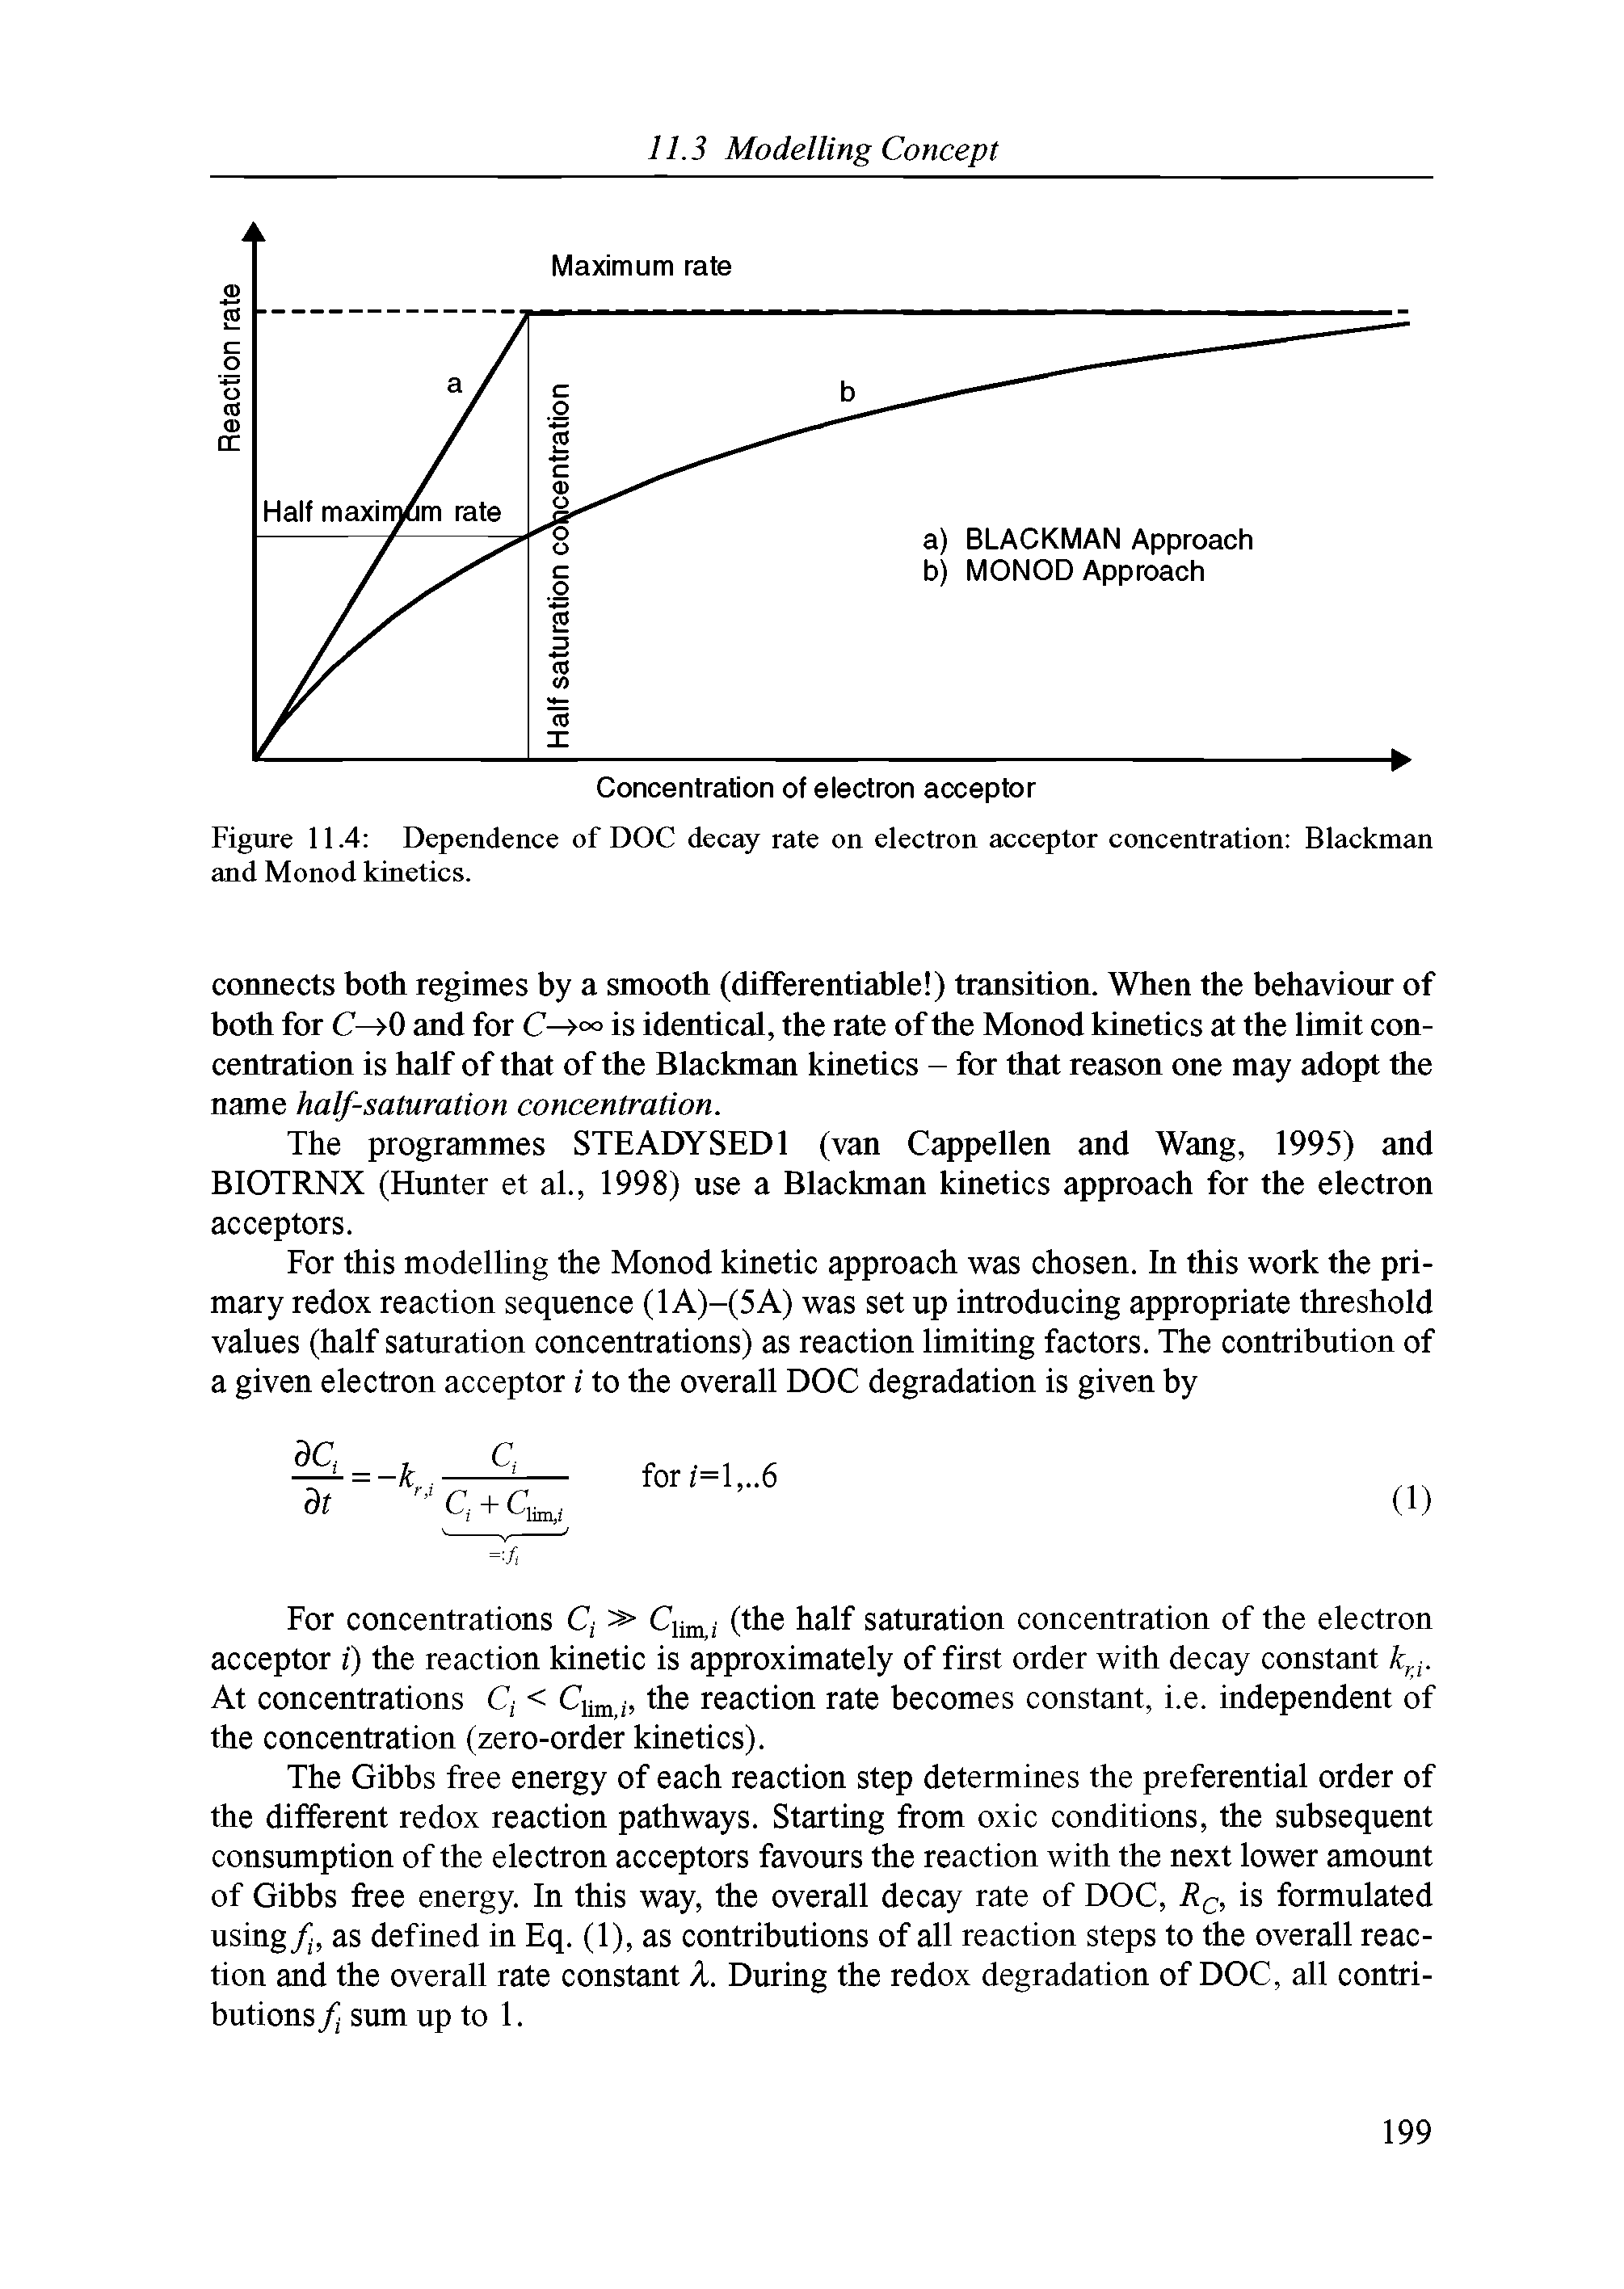 Figure 11.4 Dependence of DOC decay rate on electron acceptor concentration Blackman and Monod kinetics.